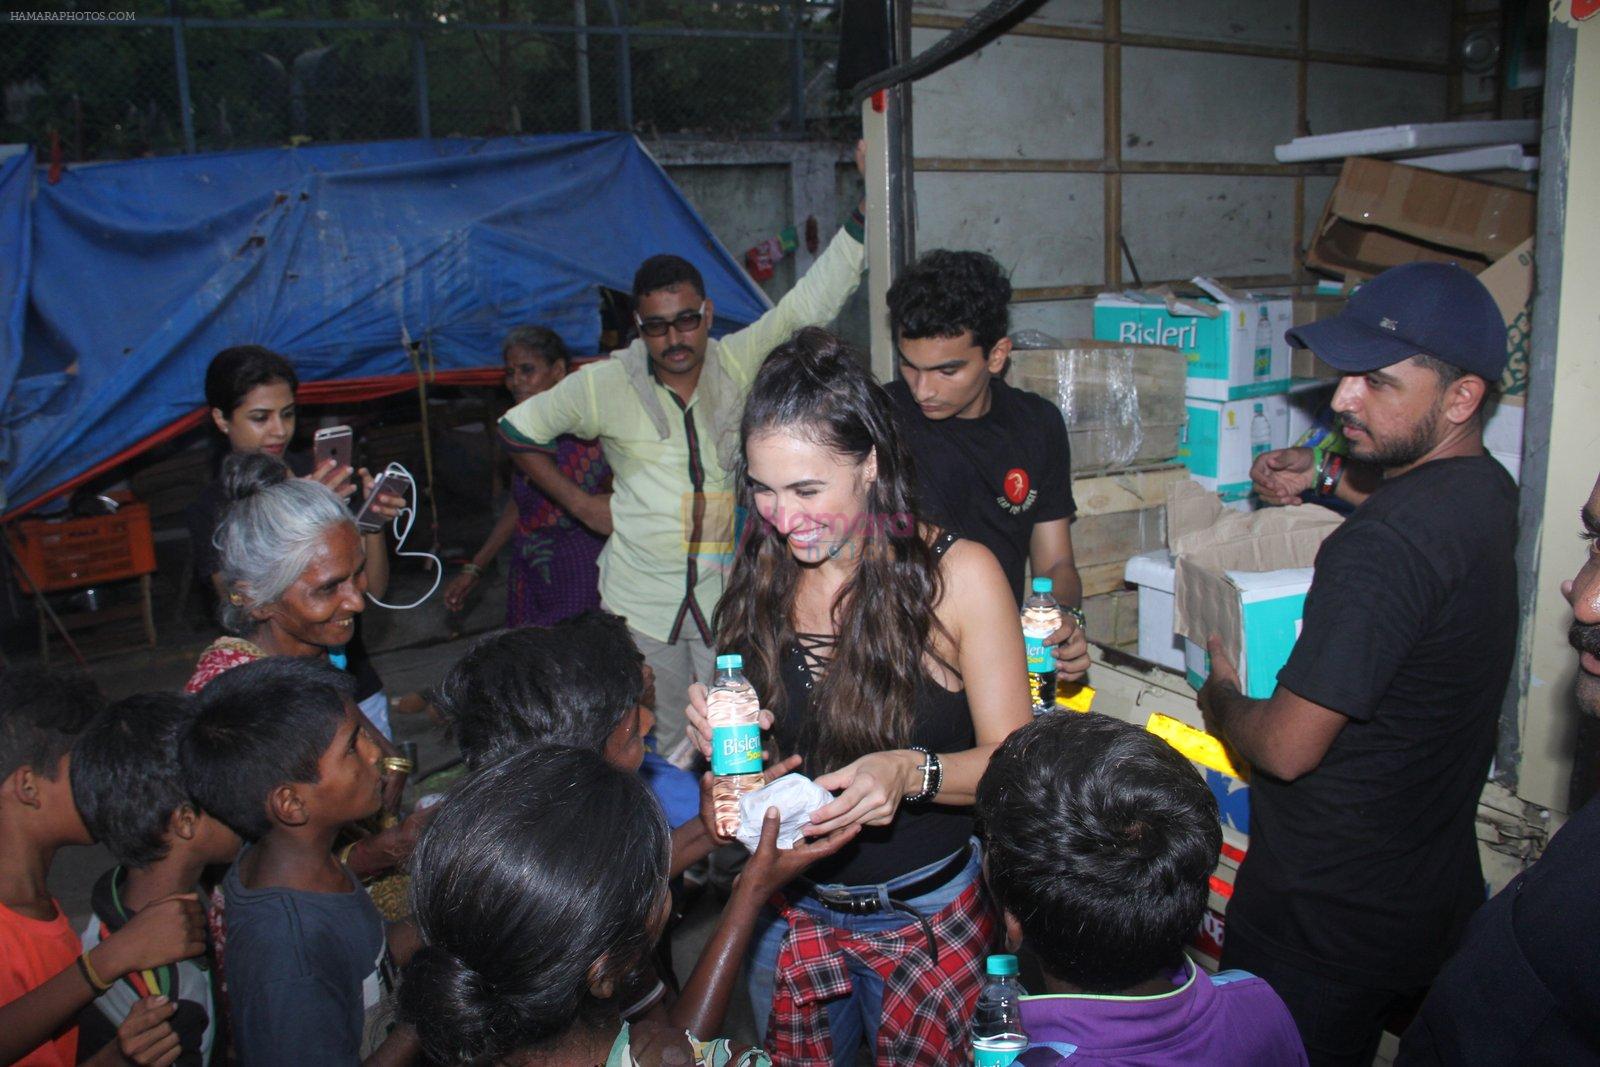 Lauren Gottlieb snapped interacting with street kids on 9th June 2016